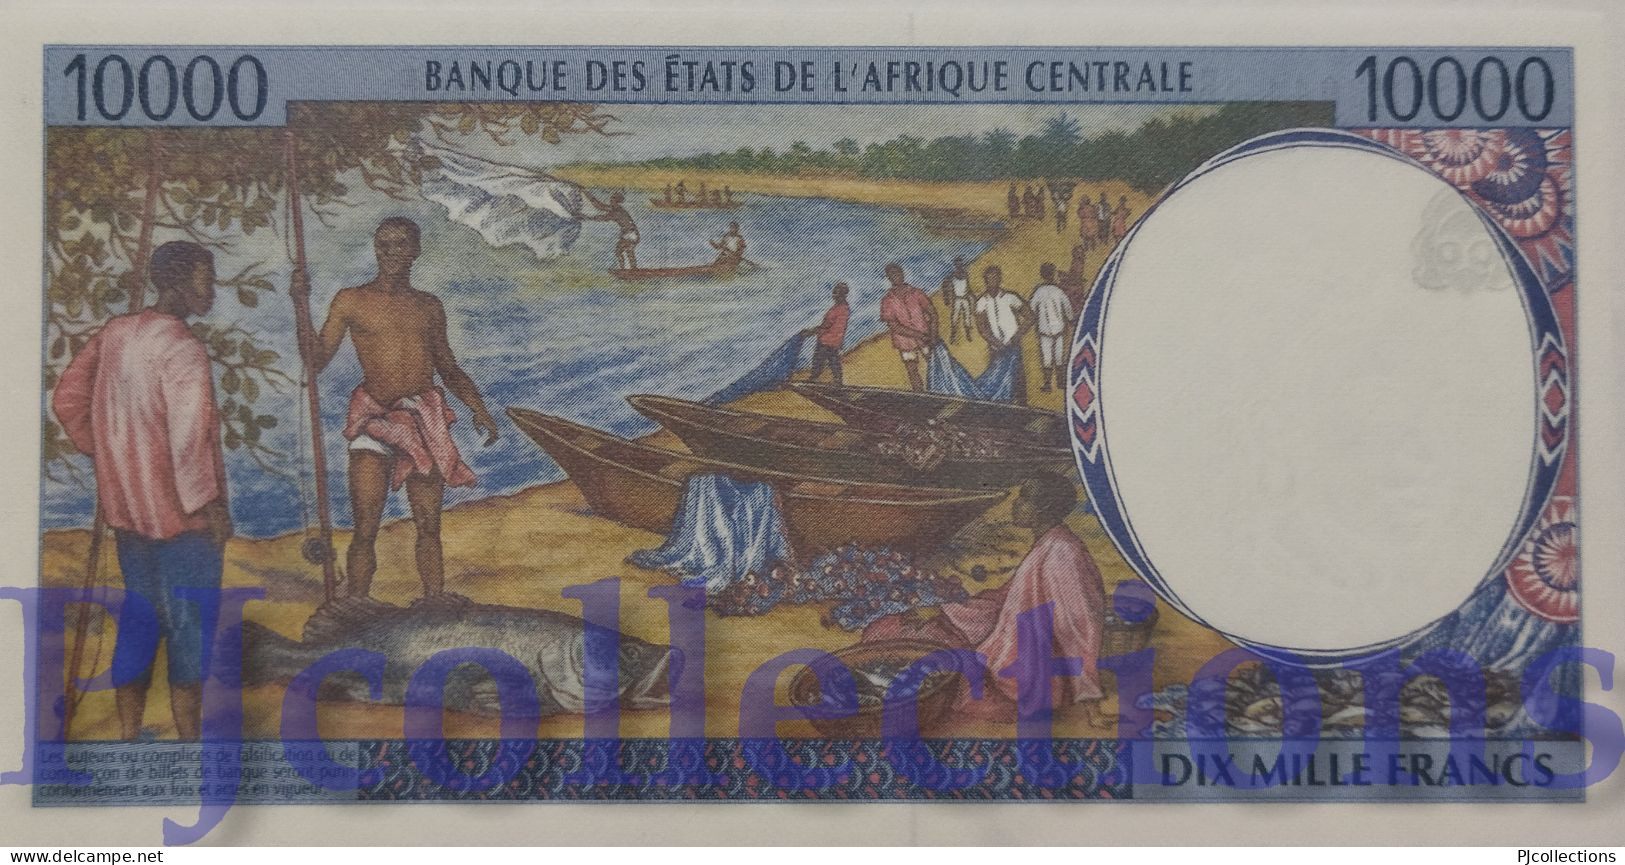 CENTRAL AFRICAN STATES 10000 FRANCS 2000 PICK 105Cf UNC - Central African Republic